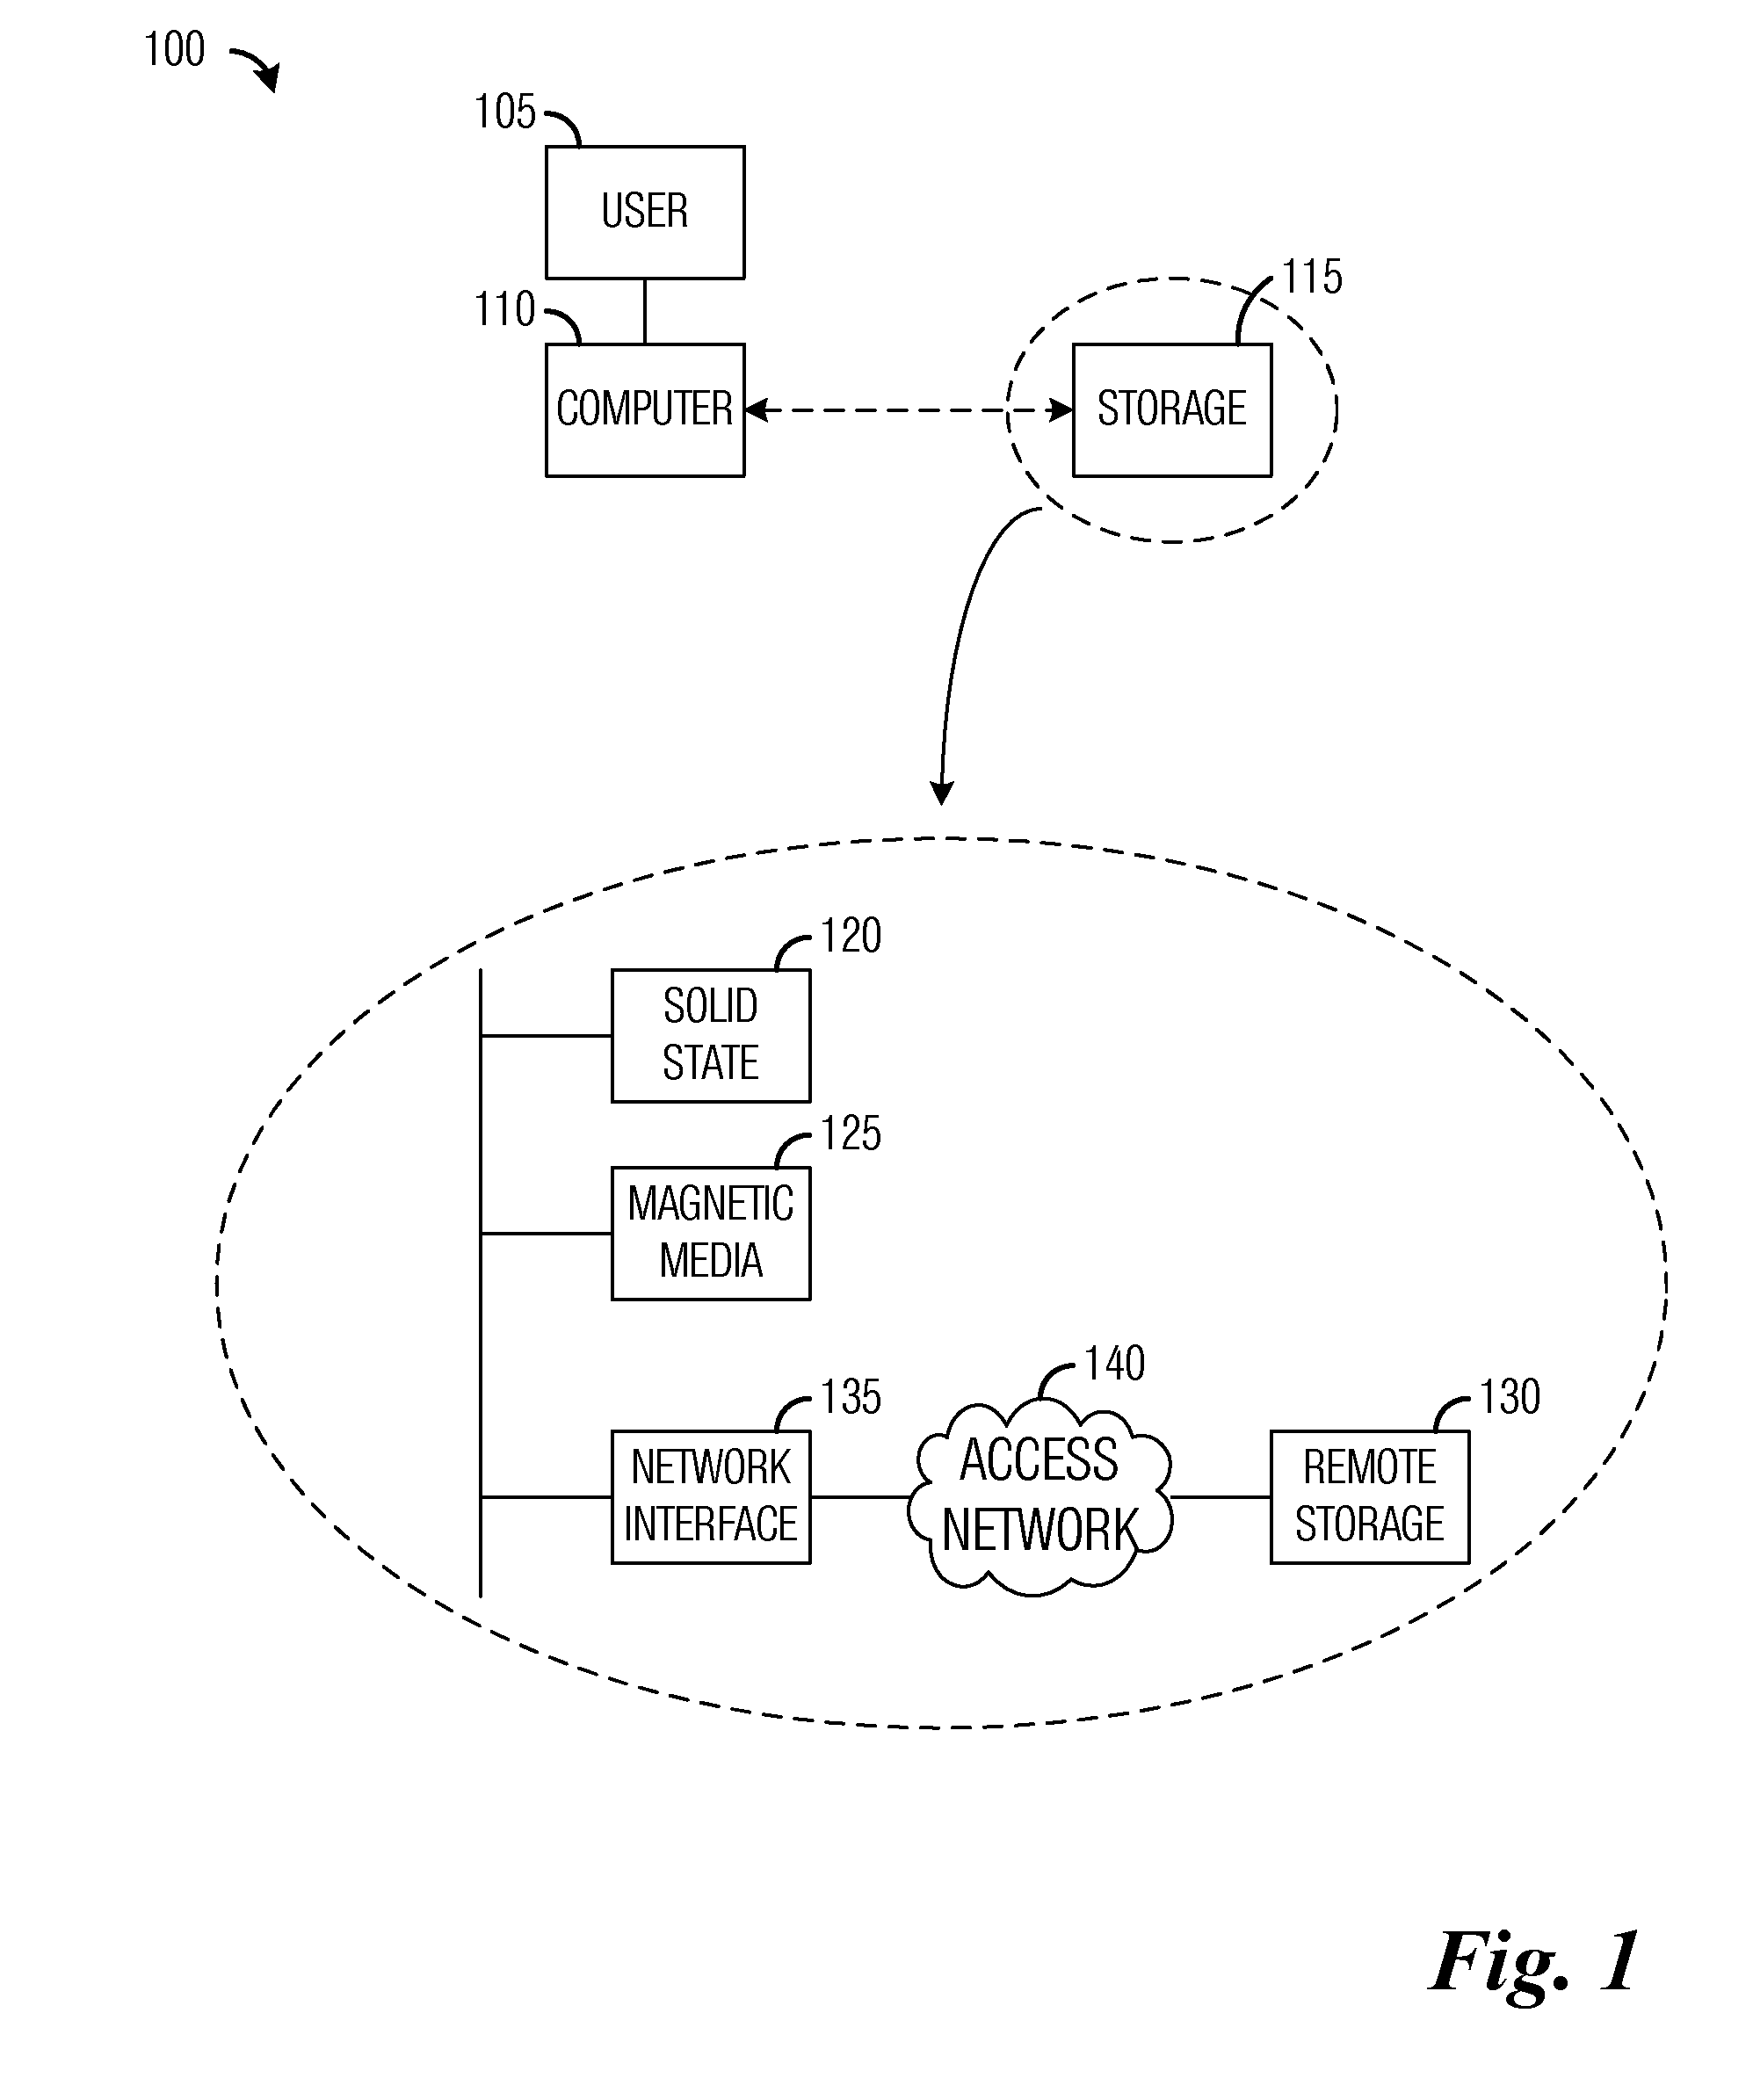 System and Method for Making Snapshots of Storage Devices